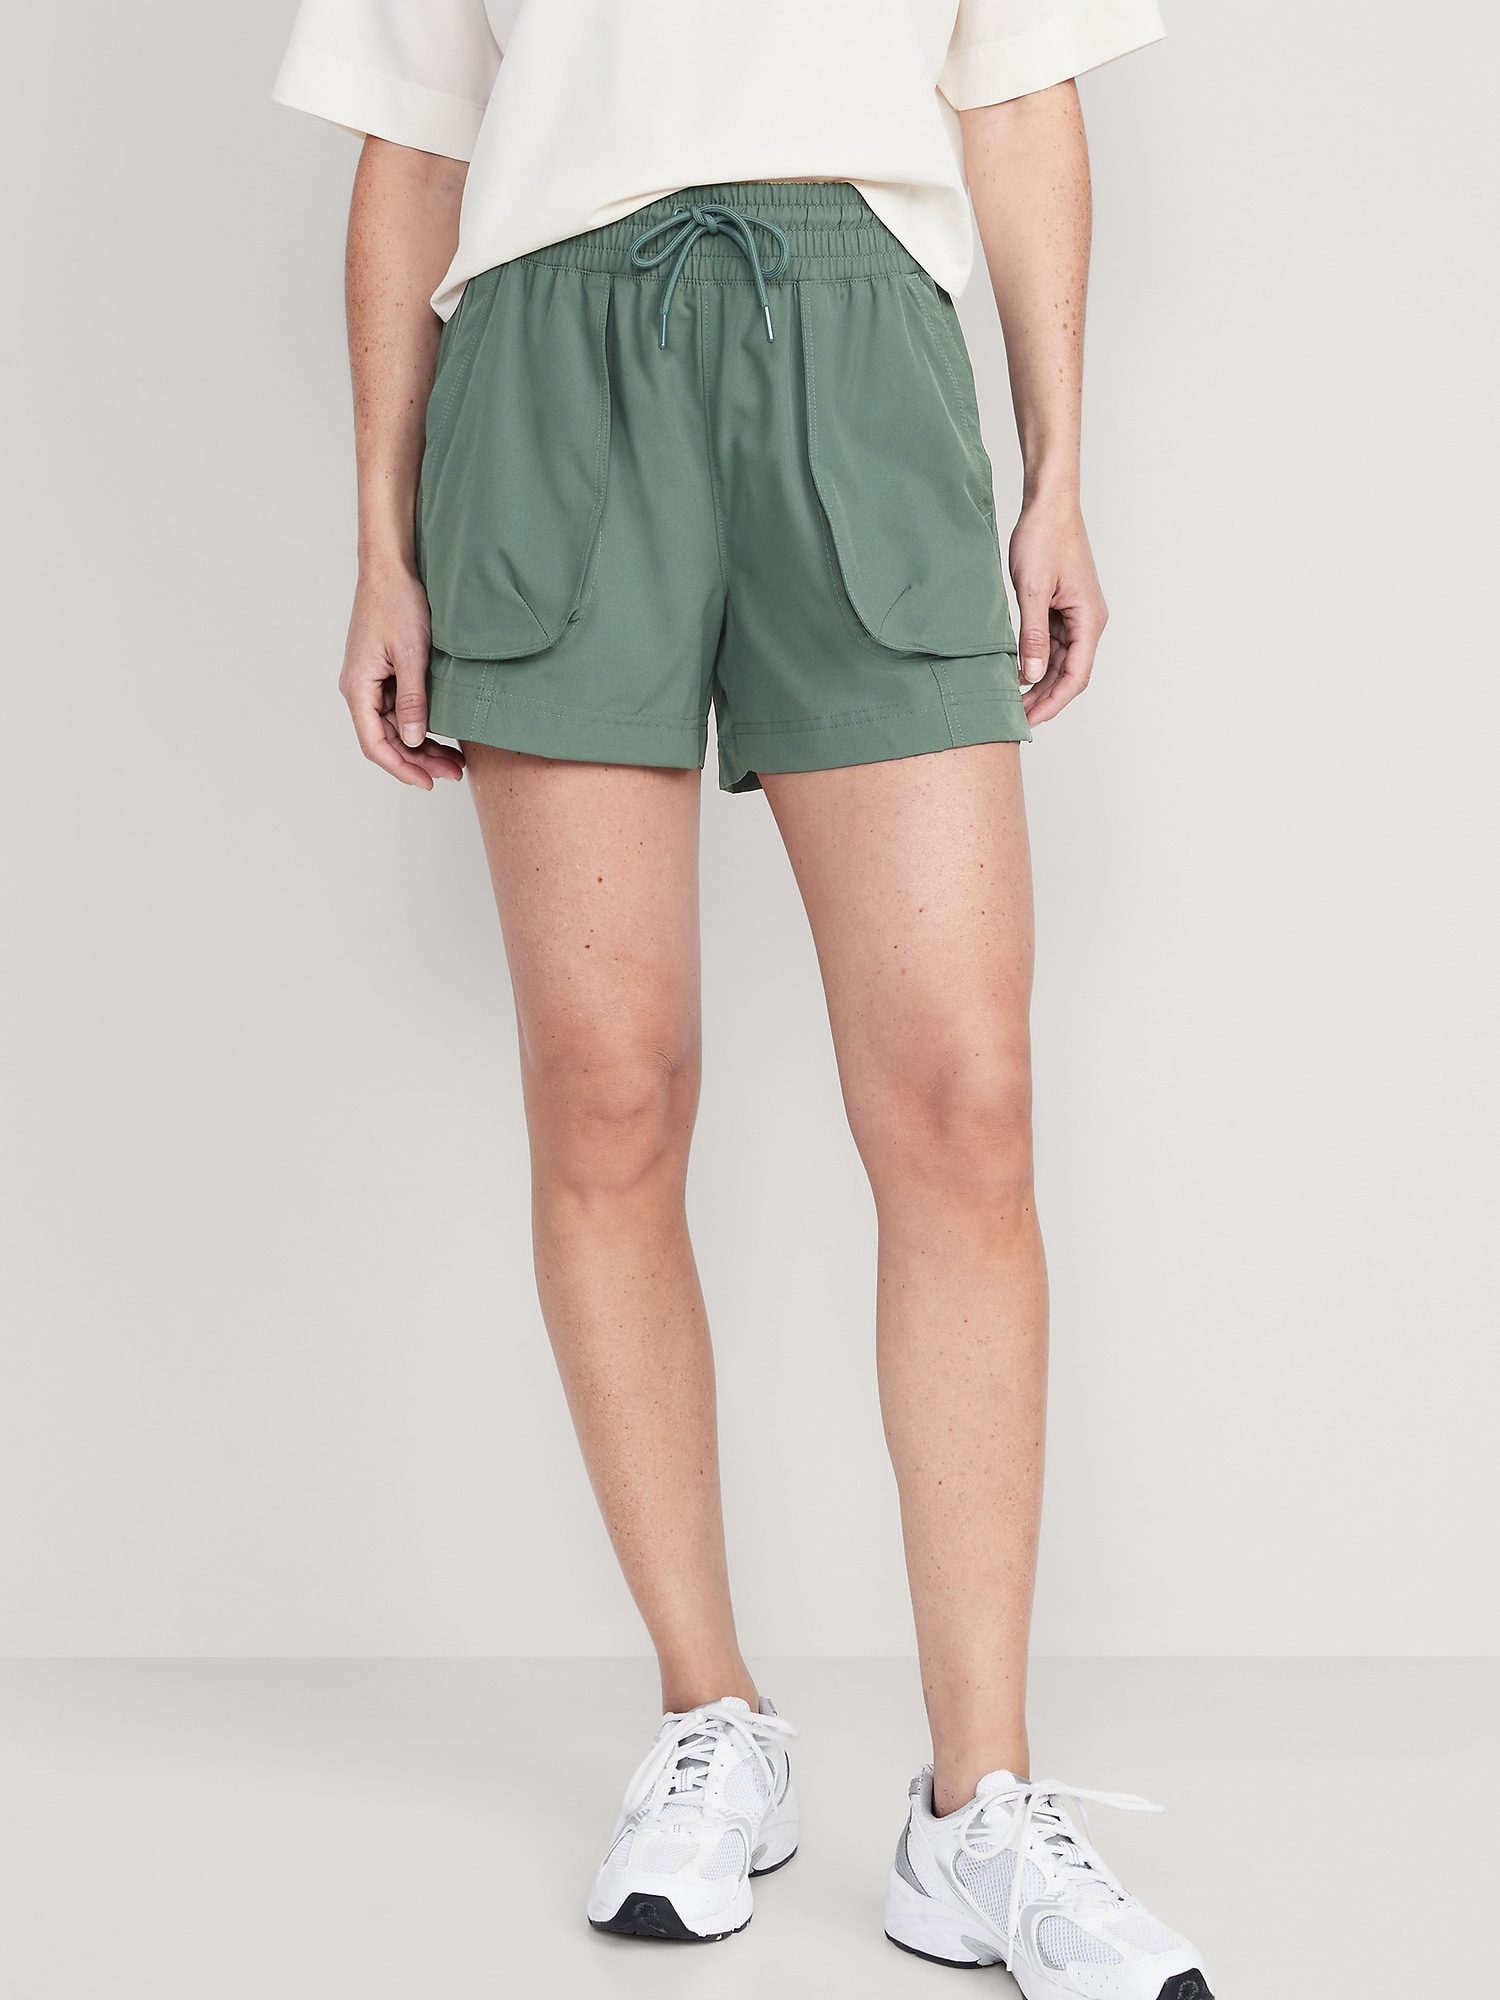 High-Waisted StretchTech Shorts -- 4-inch inseam